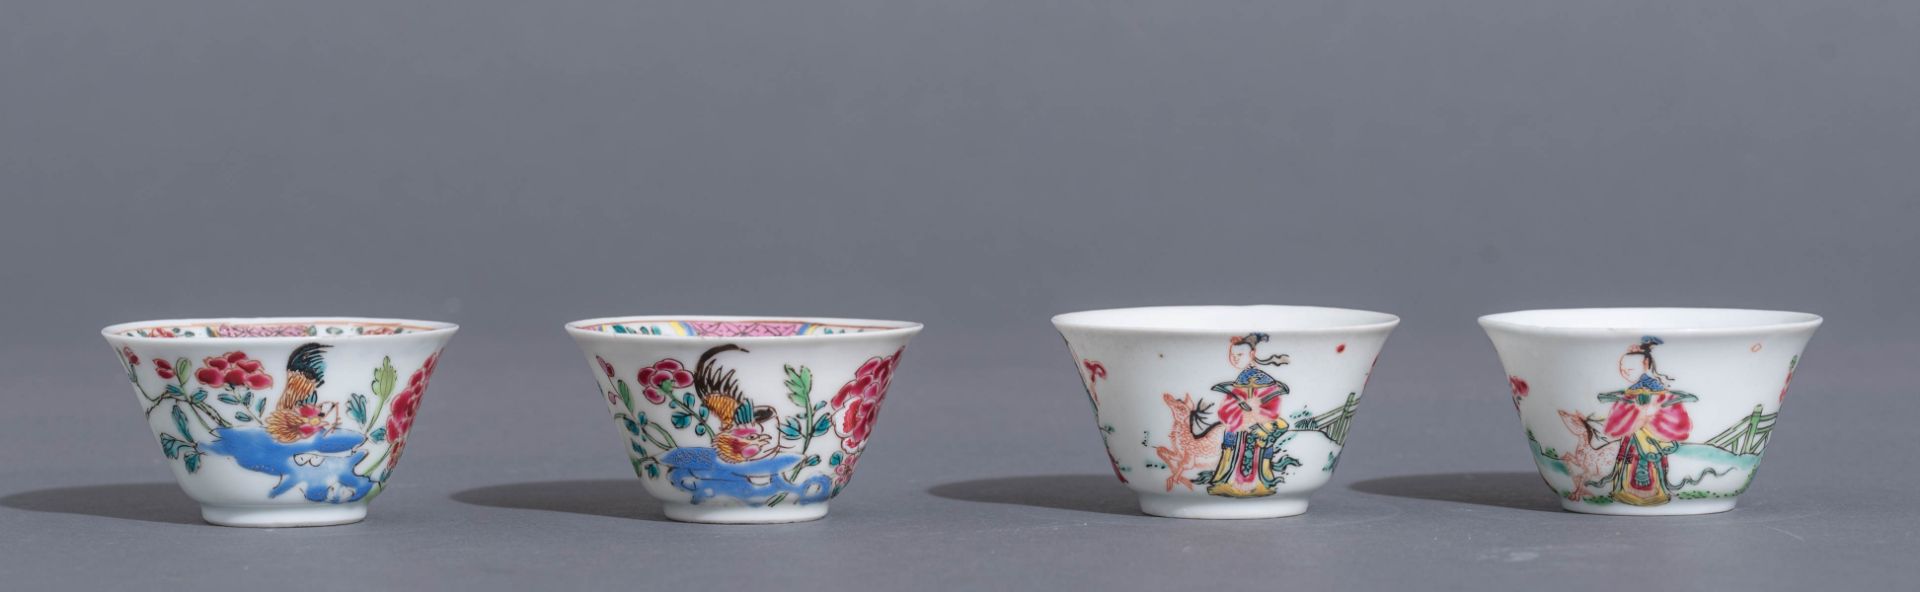 Four sets of Chinese famille rose export porcelain teacups and saucers - Image 8 of 13